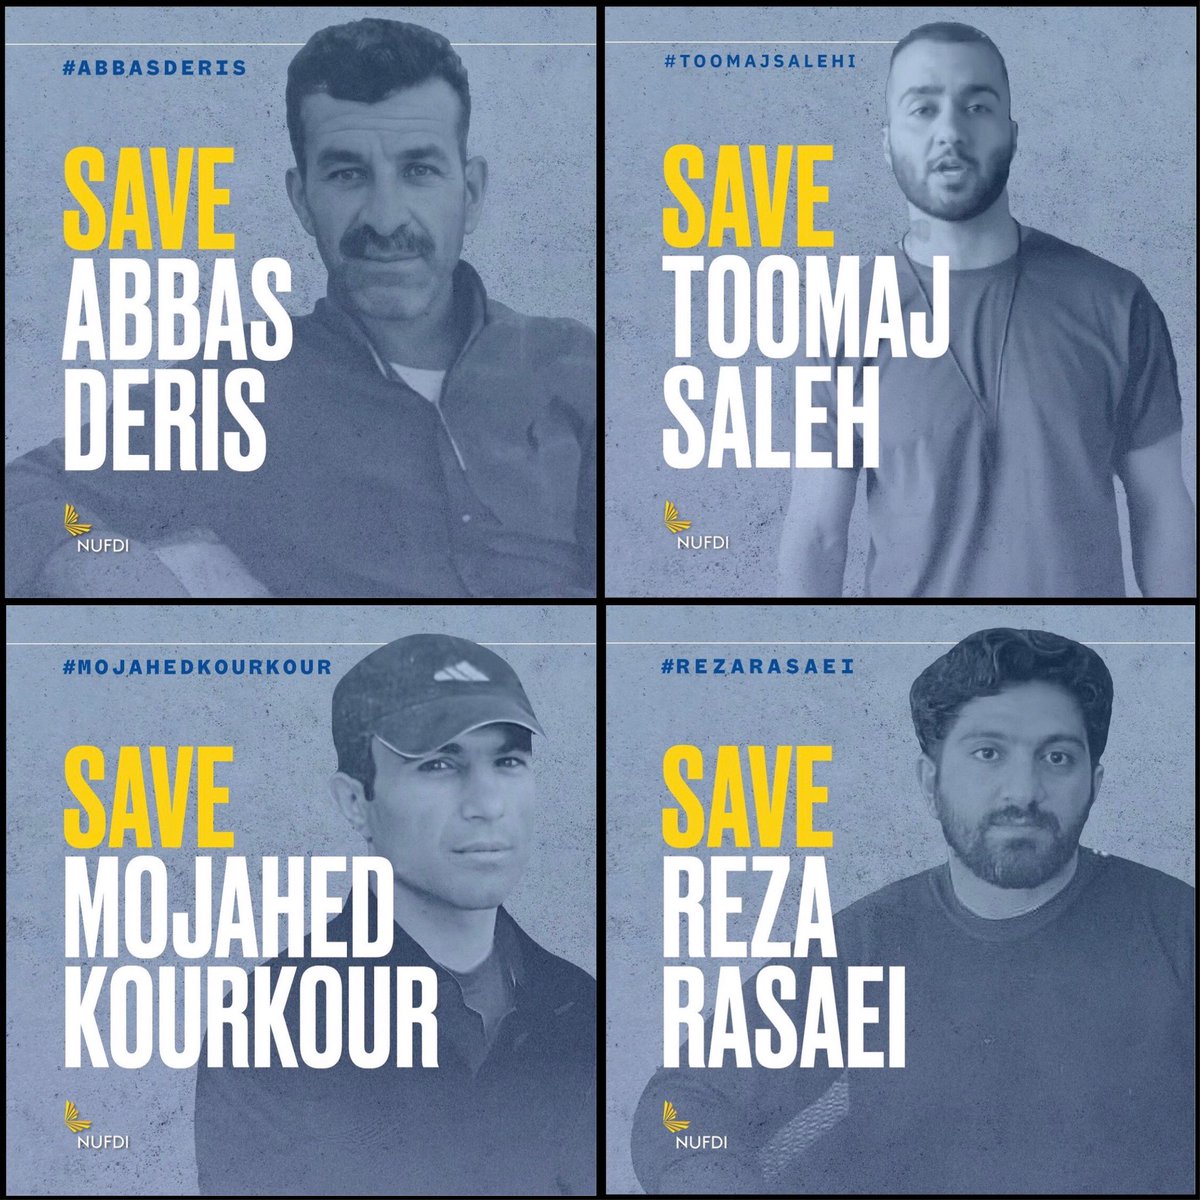 🚨 Urgent 🚨
#ToomajSalehi #RezaRasaei #MojahedKourkour #AbbasDaris lives are at imminent risk of execution by the Islamic regime in Iran at any moment!

Be their voice to save their lifes!

@JavaidRehman 
@USEnvoyIran
@UN_SPExperts

#StopExecutionsInIran